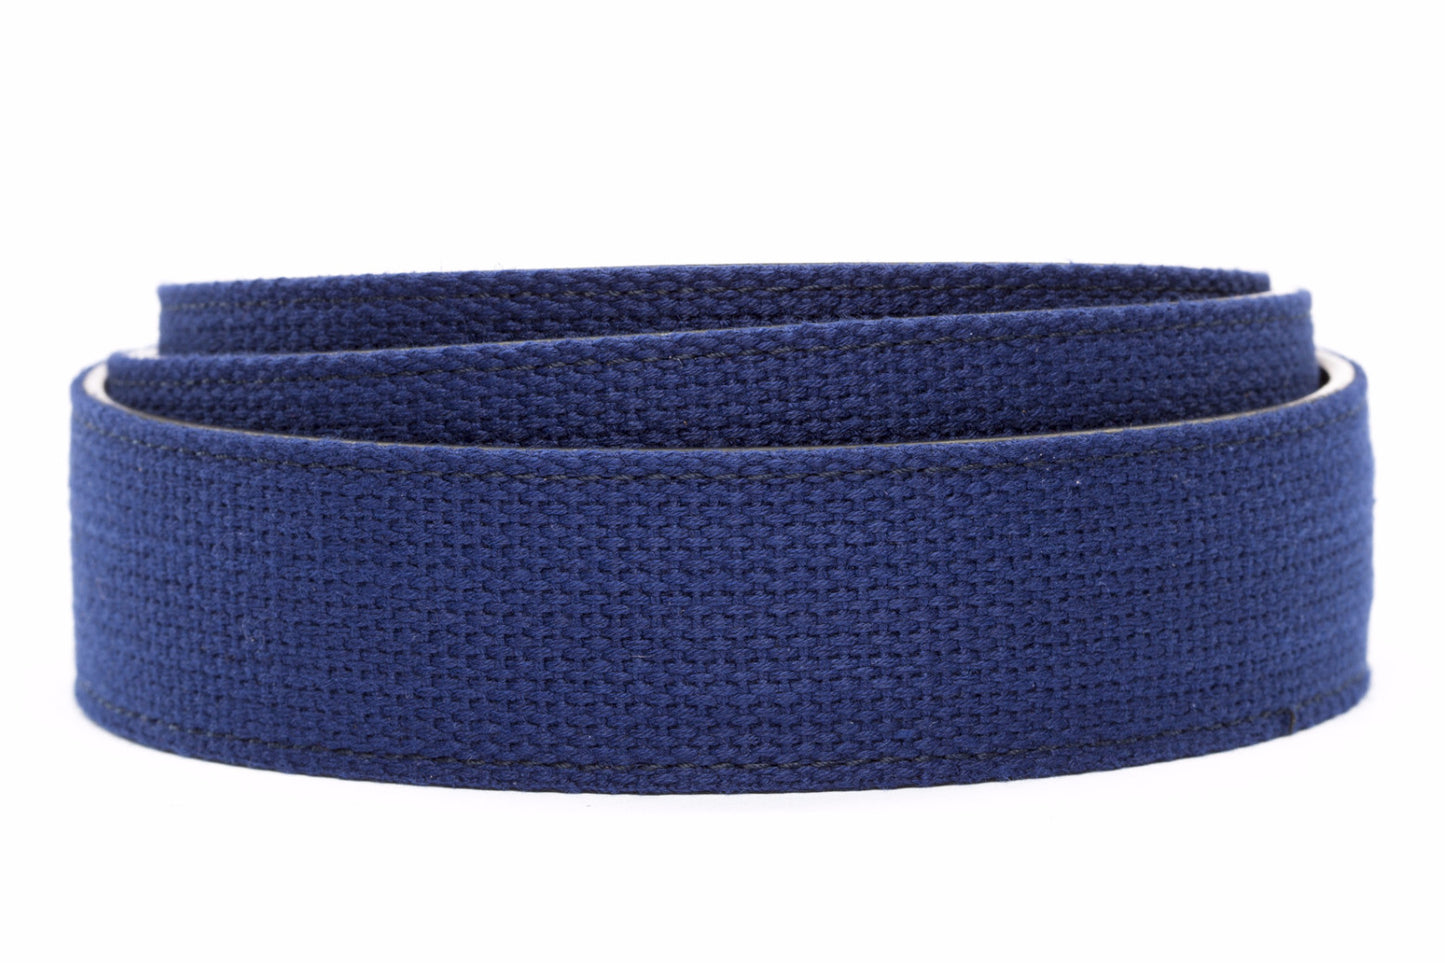 Men's canvas belt strap in navy, 1.5 inches wide, casual look